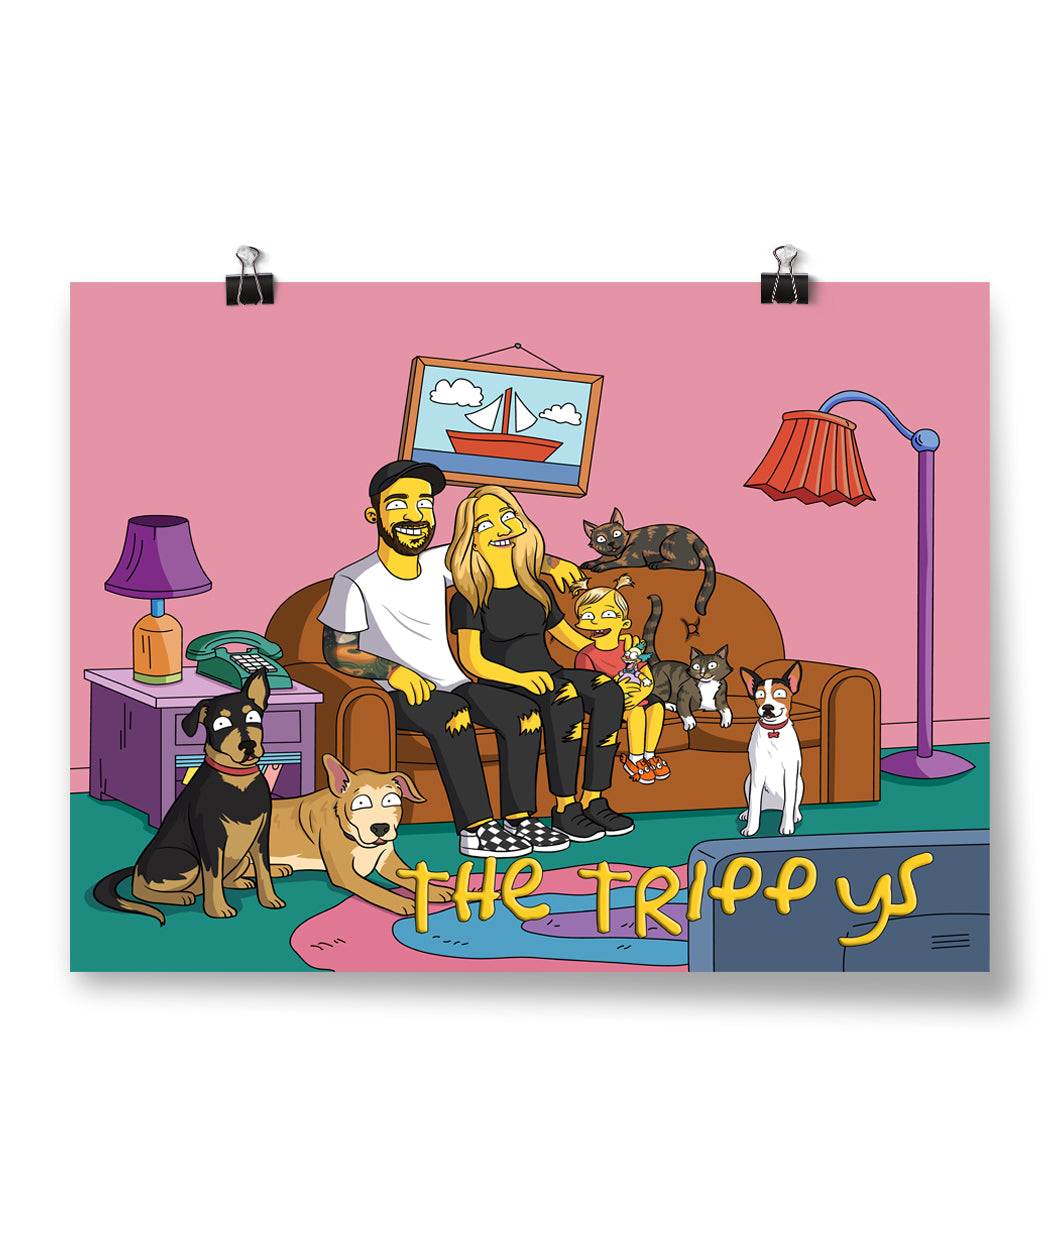 A poster of 2 adults, 1 child, 3 dogs, and 2 cats sitting in a living room drawn in the style of The Simpsons - by Charles Trippy